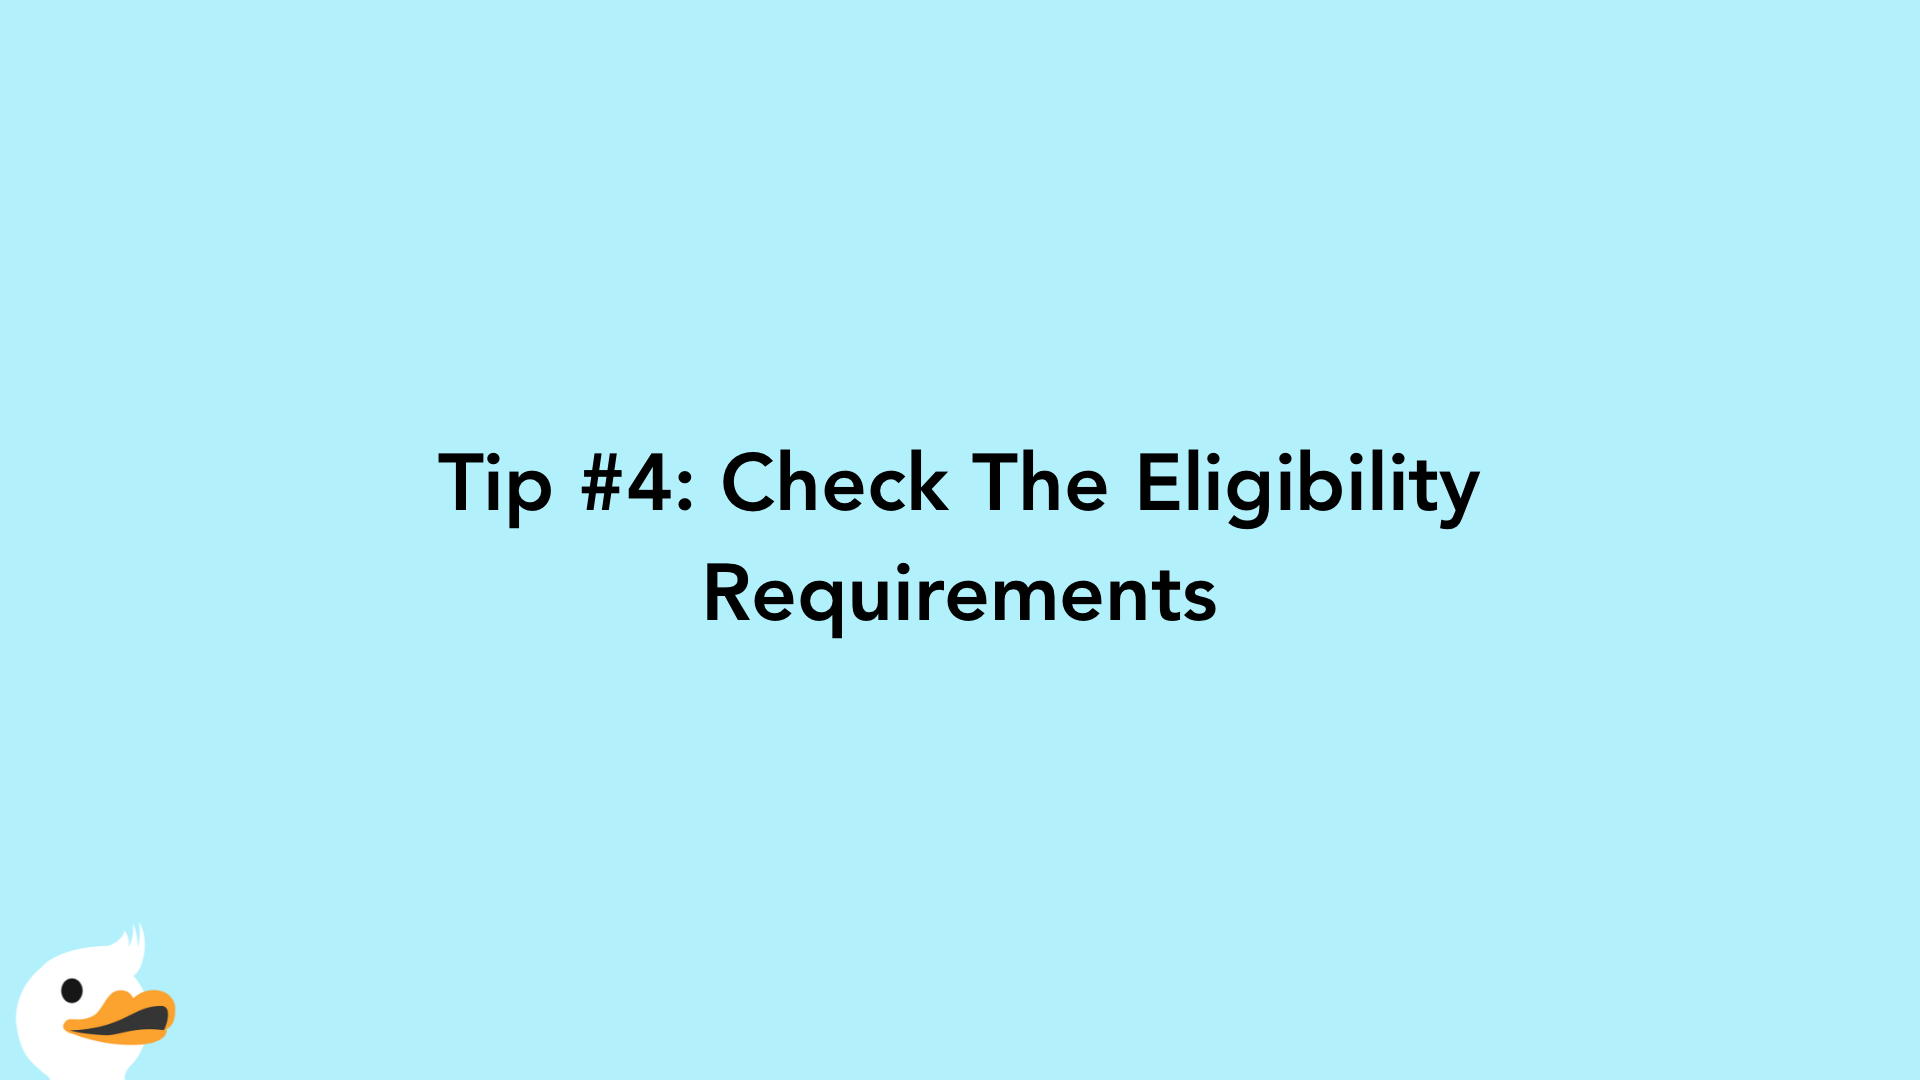 Tip #4: Check The Eligibility Requirements